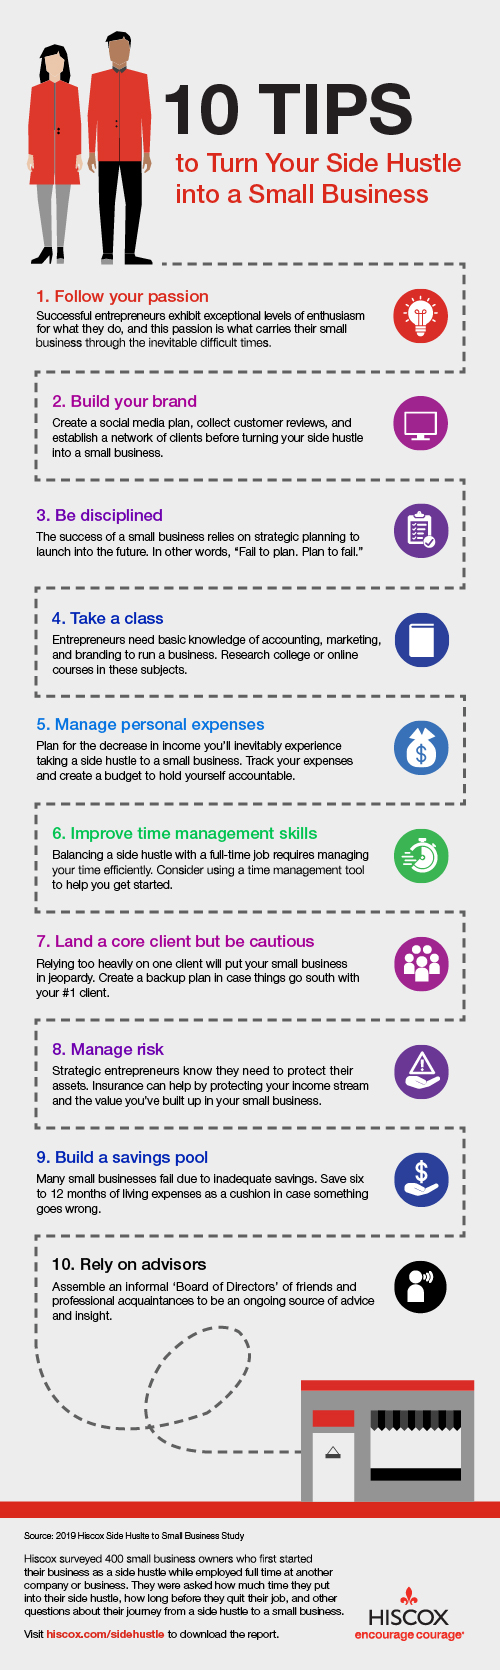 Infographic: 10 tips to turn a side hustle into a small business